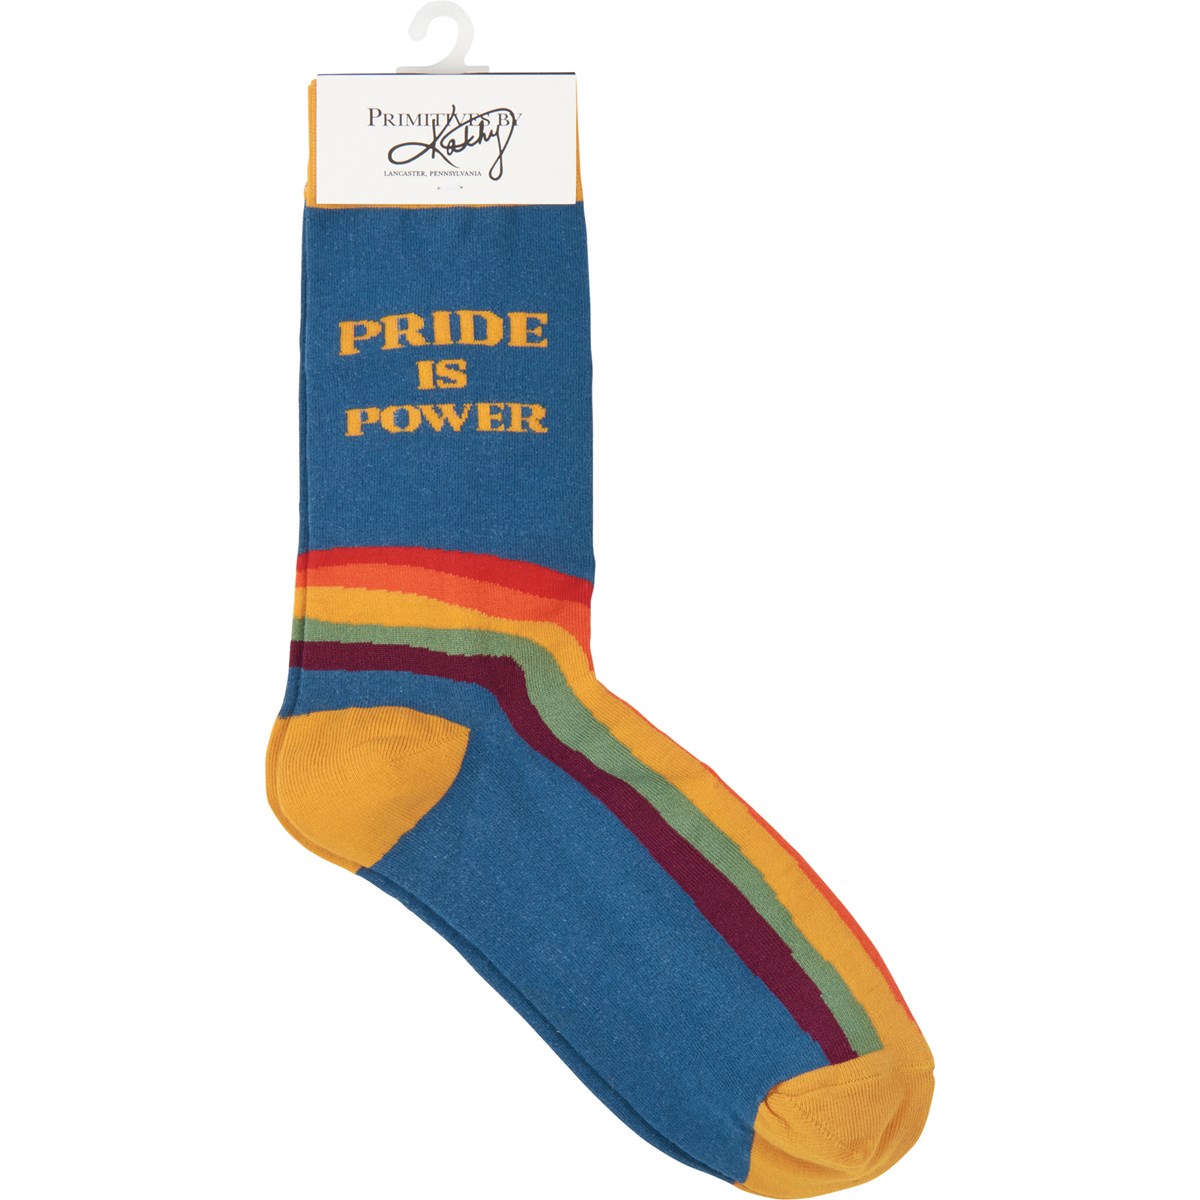 Socks - Pride Is Power - One Size Fits Most - Cotton, Nylon, Spandex